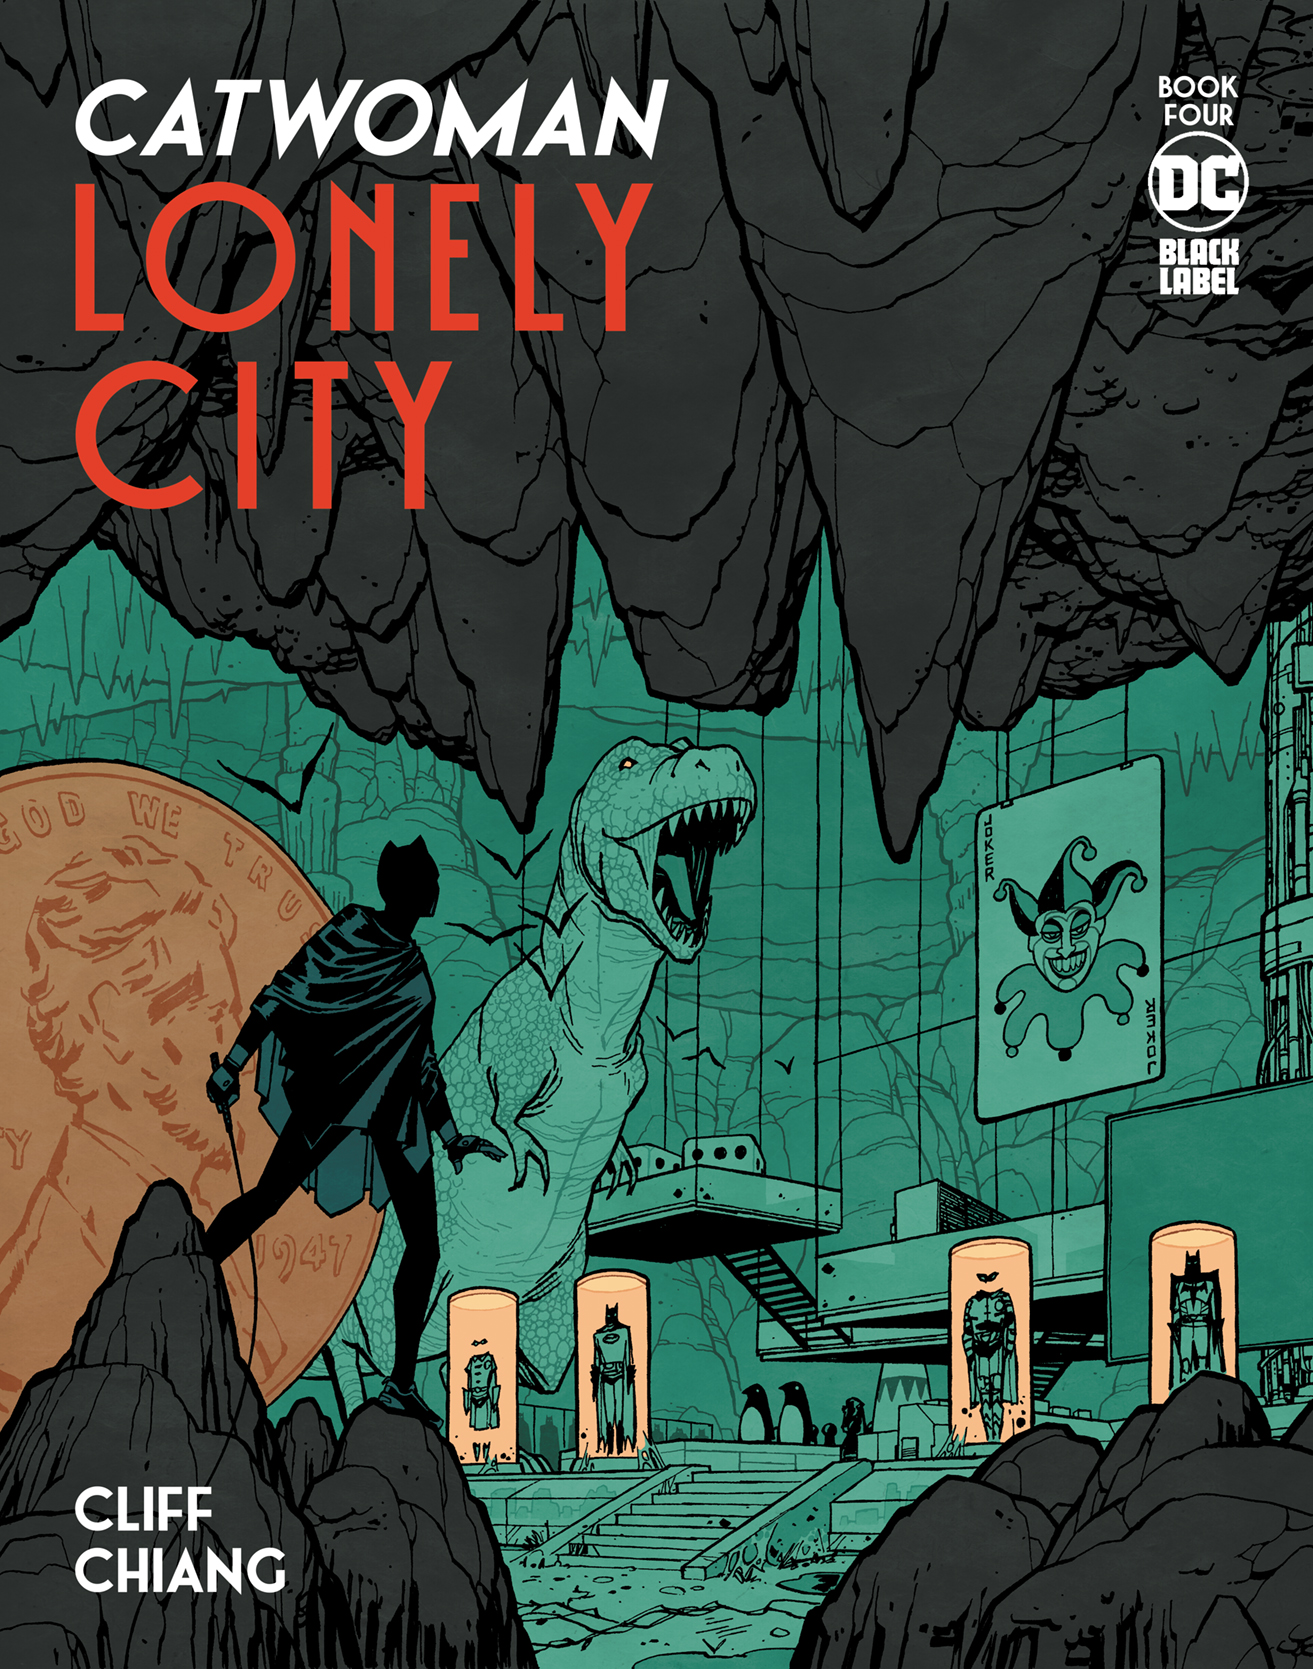 Catwoman Lonely City #4 Cover A Cliff Chiang (Mature) (Of 4)